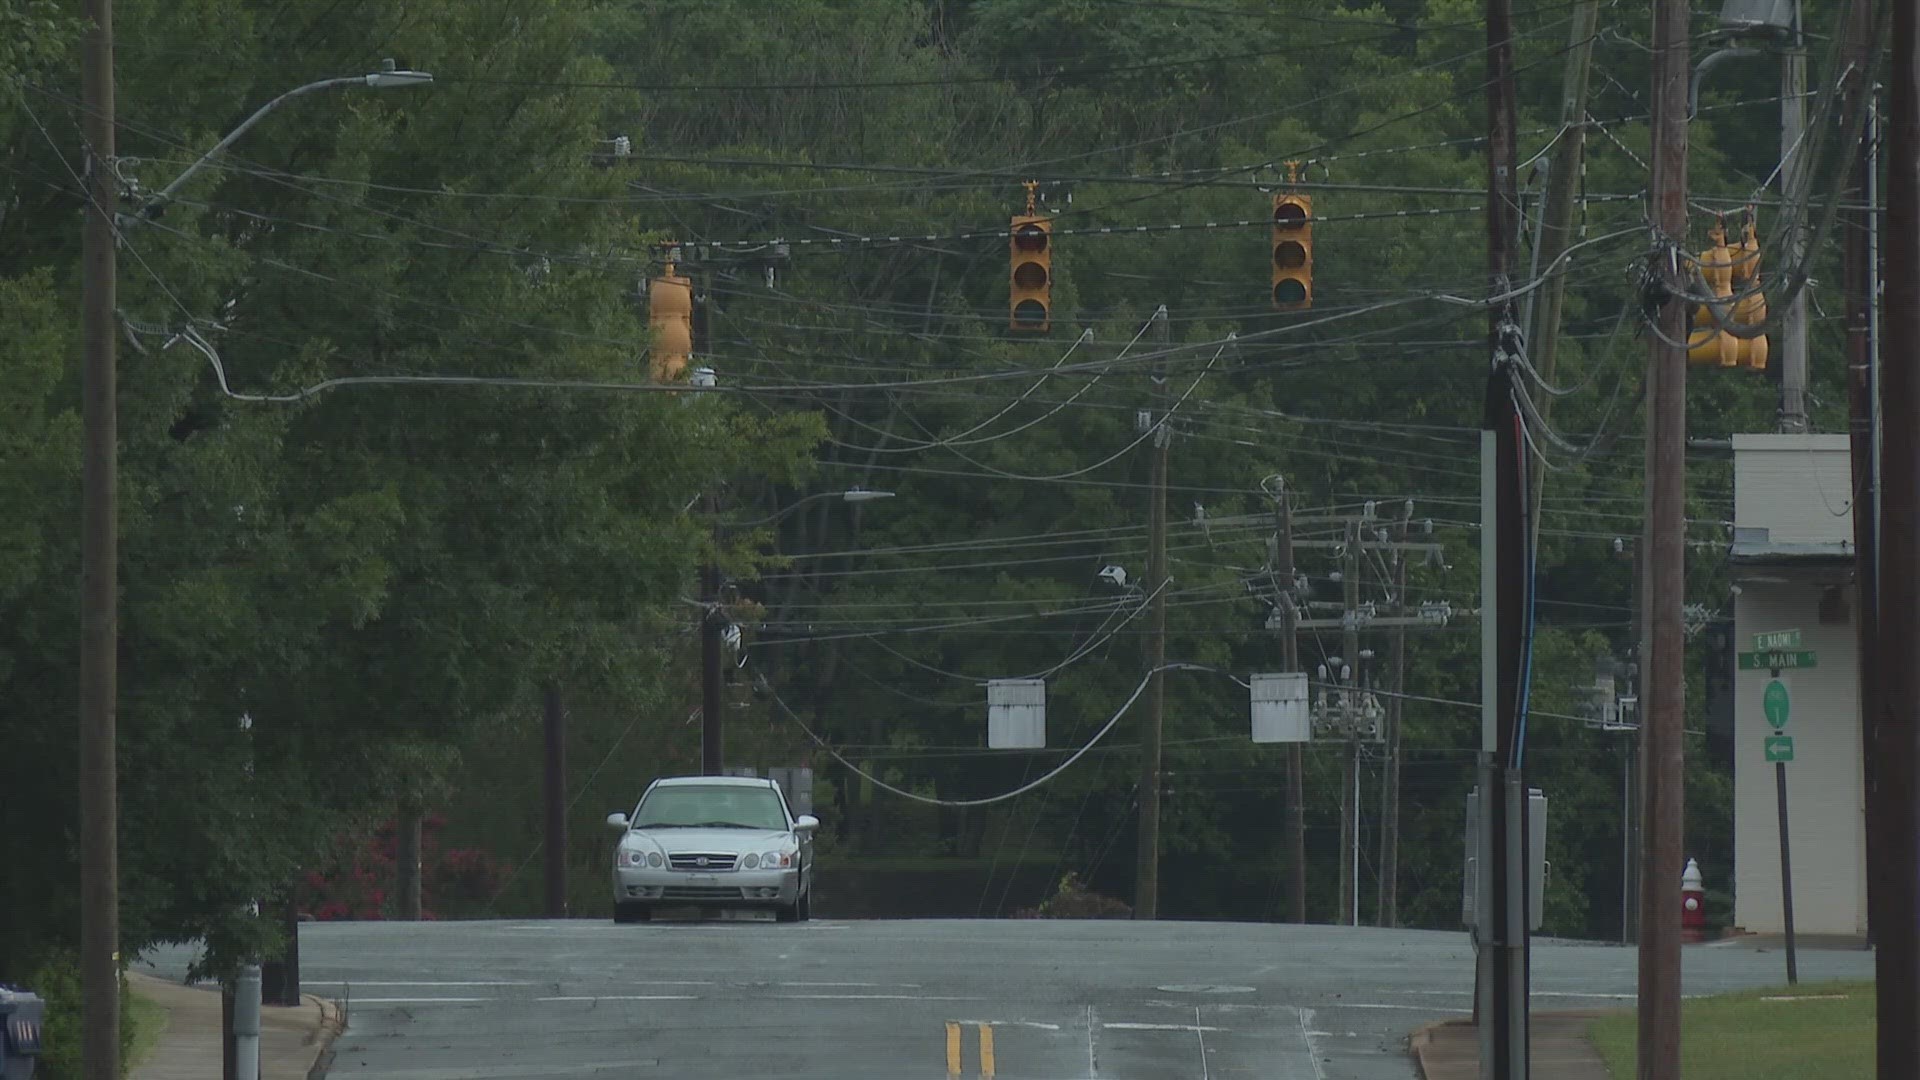 At the peak, more than 7,000 Duke Energy customers in Randolph County were without power.